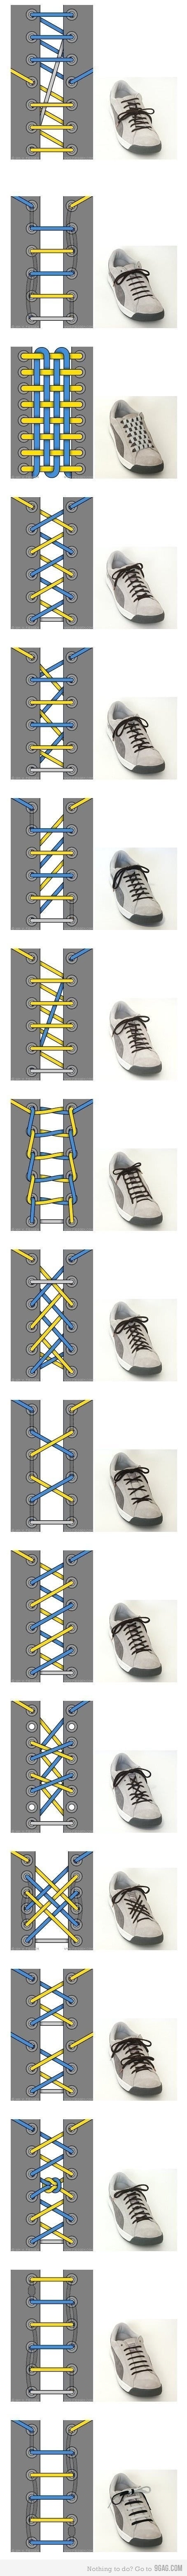 17 Popular And Creative Ways You Can Tie Your Shoes